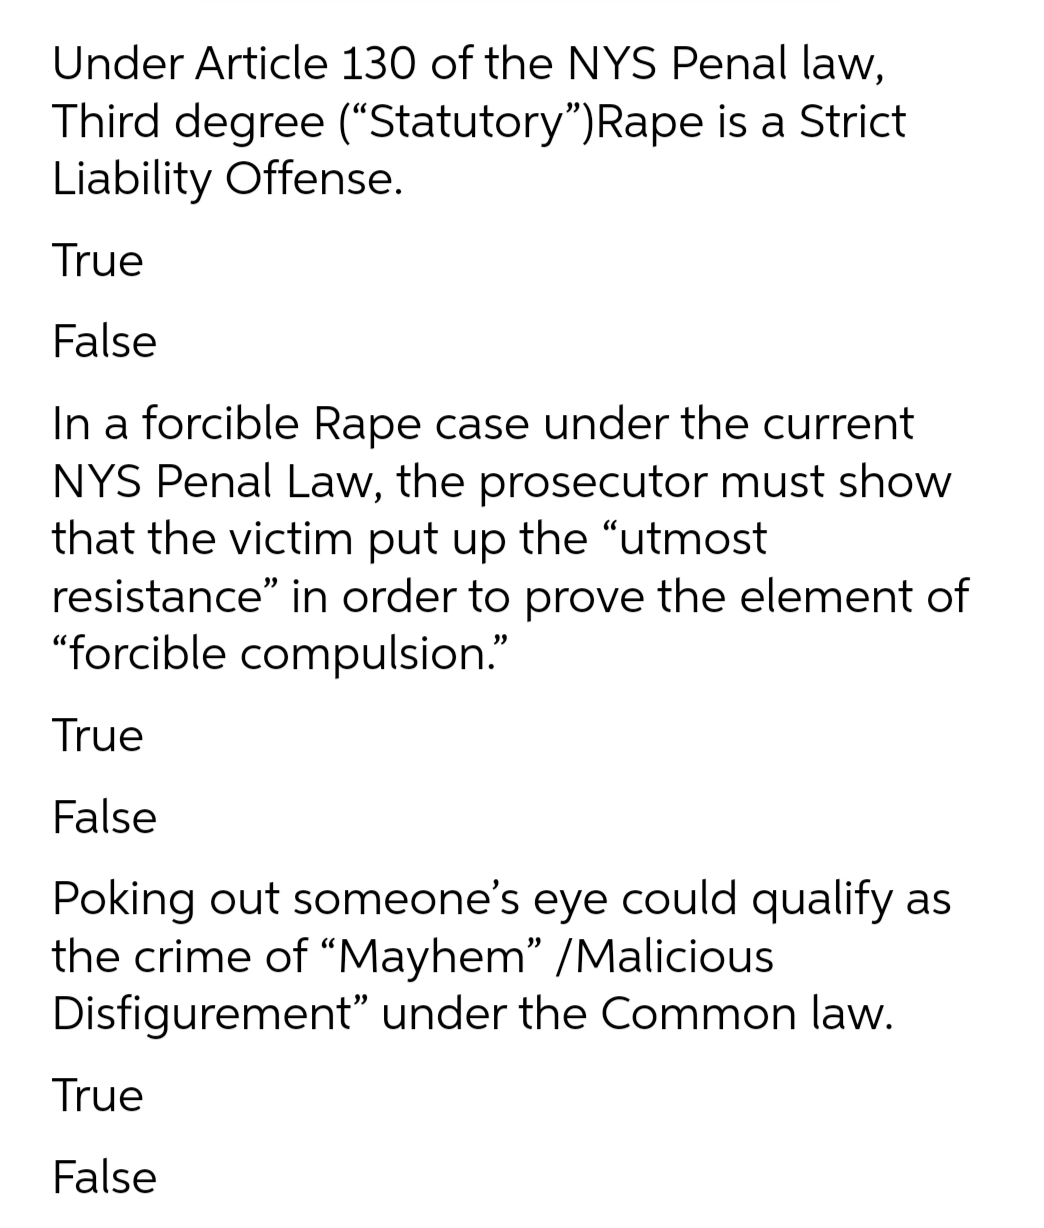 Under Article 130 of the NYS Penal law,
Third degree (“Statutory")Rape is a Strict
Liability Offense.
True
False
In a forcible Rape case under the current
NYS Penal Law, the prosecutor must show
that the victim put up the “utmost
resistance" in order to prove the element of
"forcible compulsion."
True
False
Poking out someone's eye could qualify as
the crime of "Mayhem" /Malicious
Disfigurement" under the Common law.
True
False
